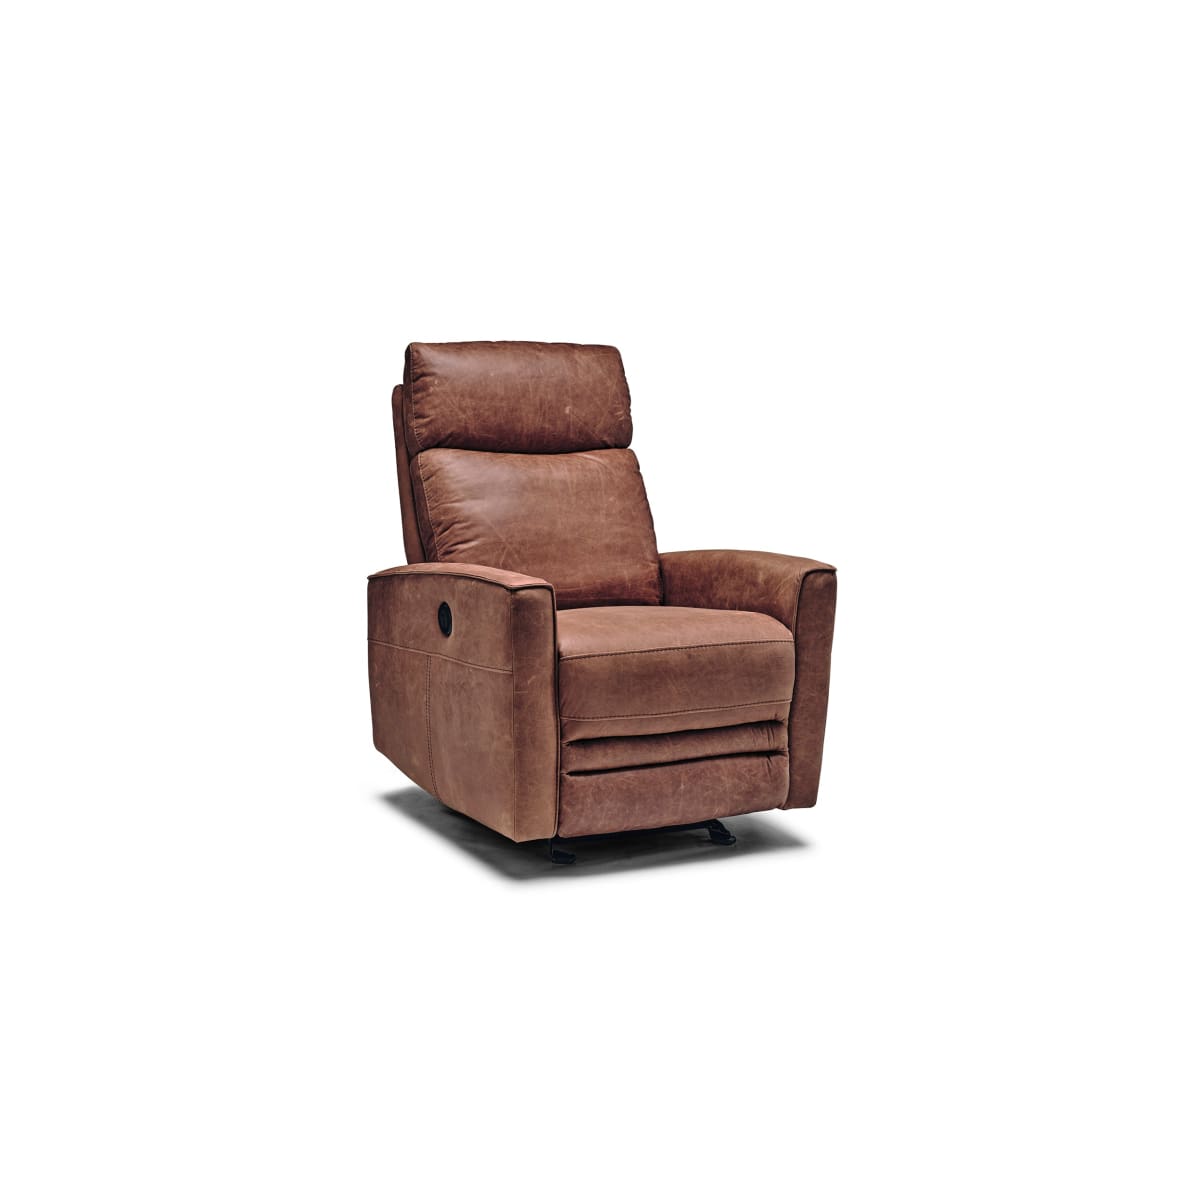 Mateo Power Recliner Chair - accent chairs